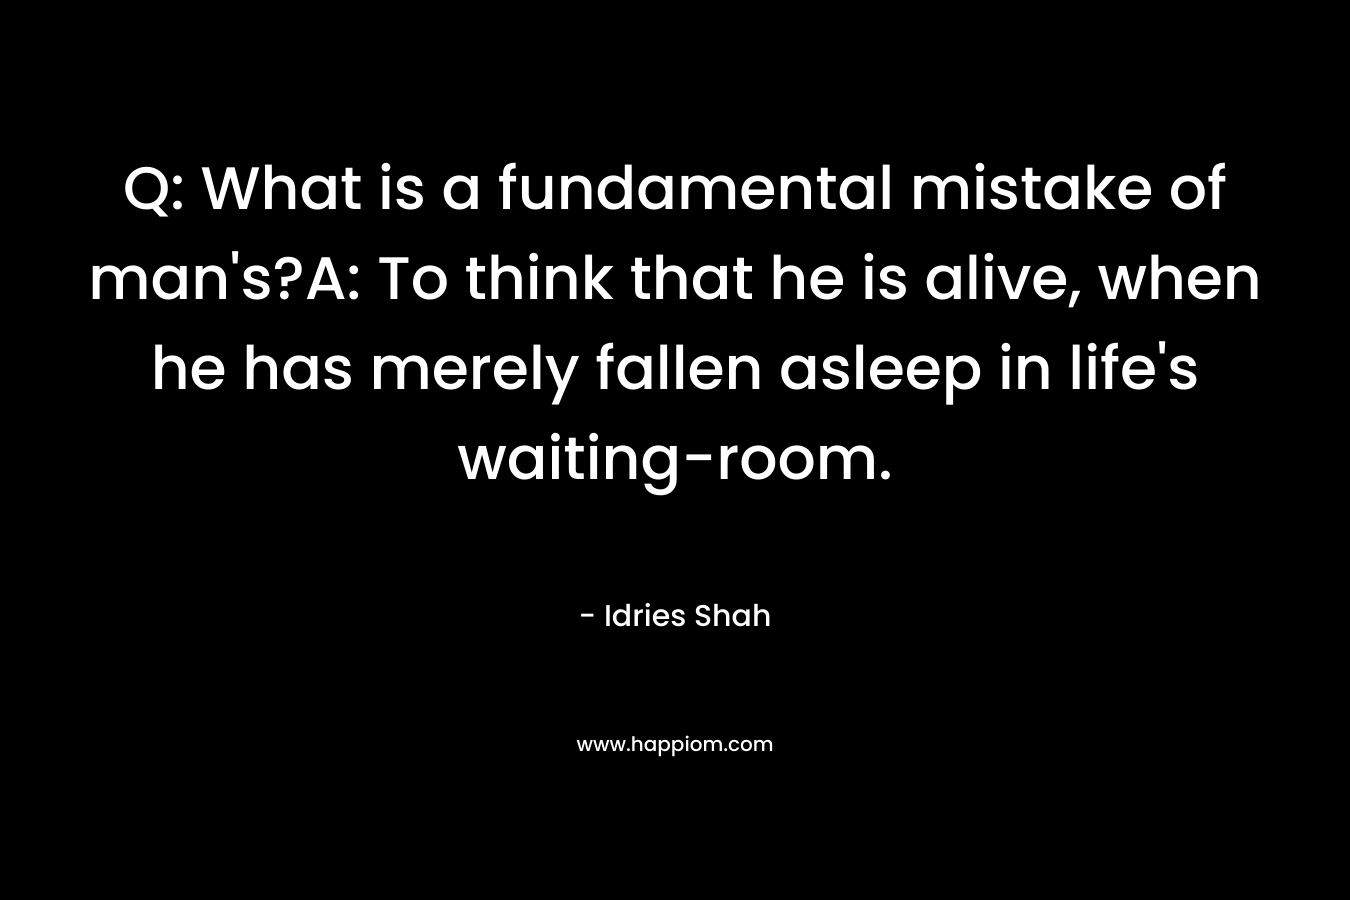 Q: What is a fundamental mistake of man's?A: To think that he is alive, when he has merely fallen asleep in life's waiting-room.